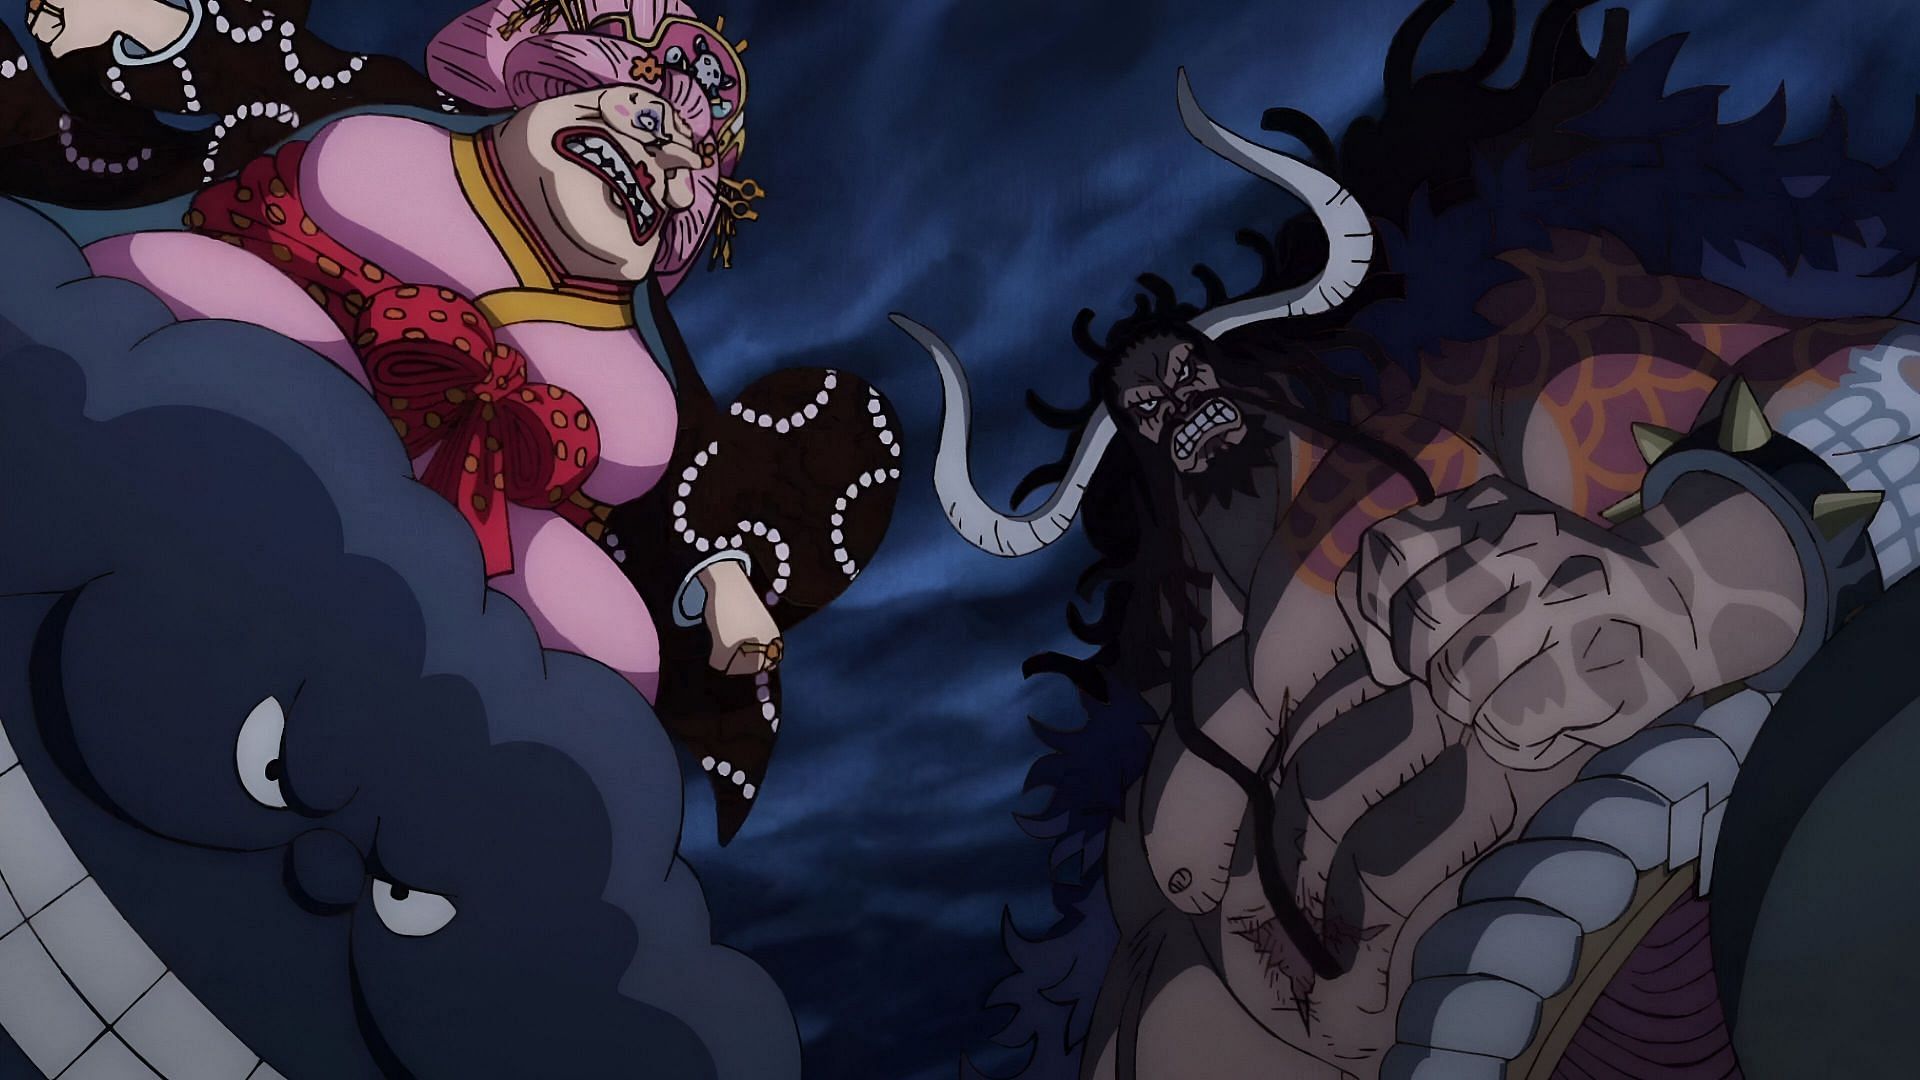 Oda unveils young Kaido and Big Mom in the latest One Piece art (Image via Toei Animation)